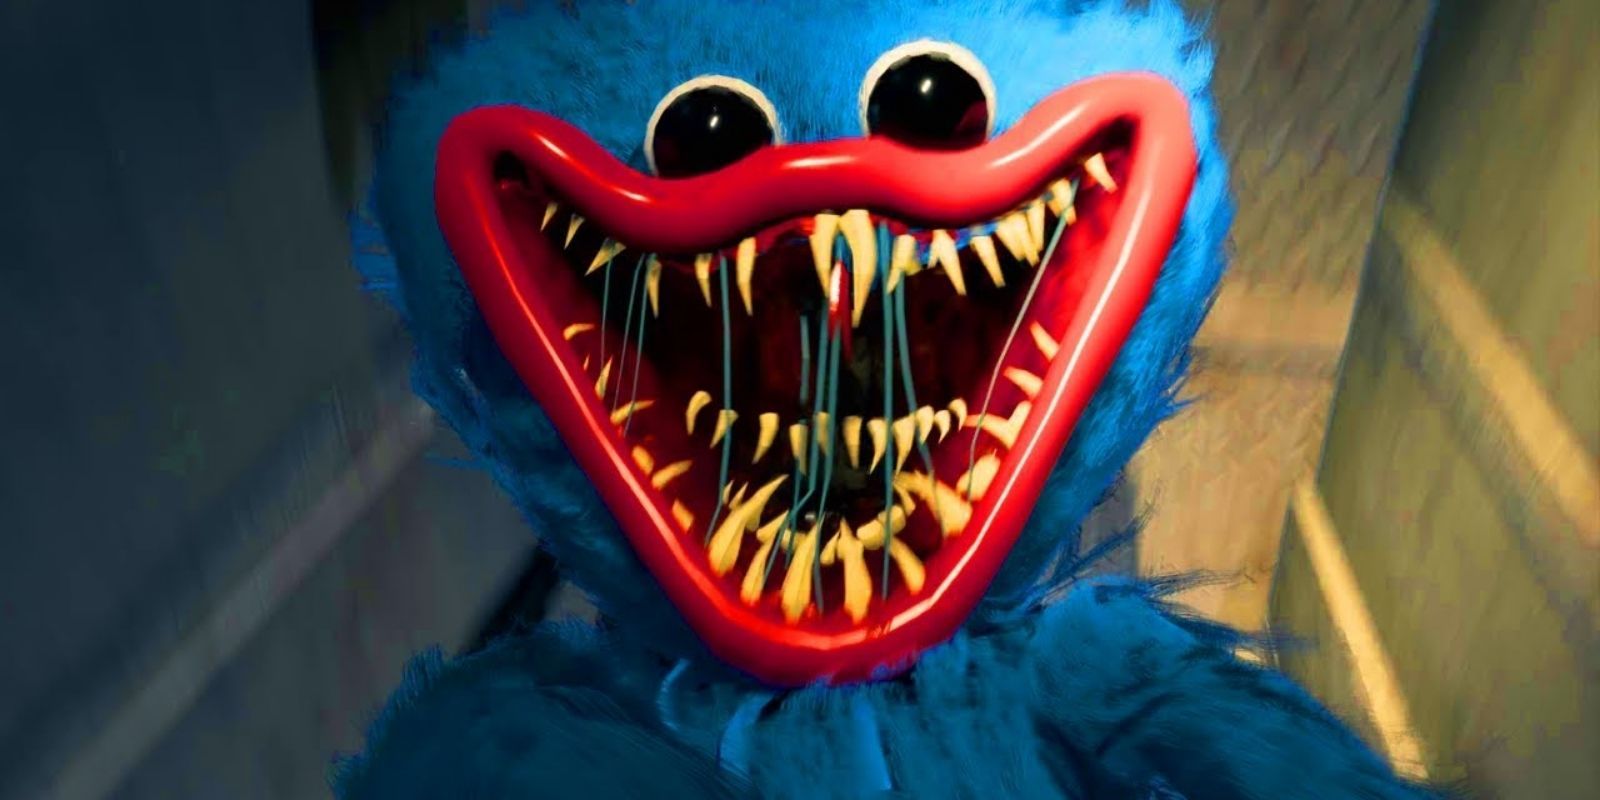 Poppy Playtime monster Huggy Wuggy, a blue plush toy with a gaping toothy smile.